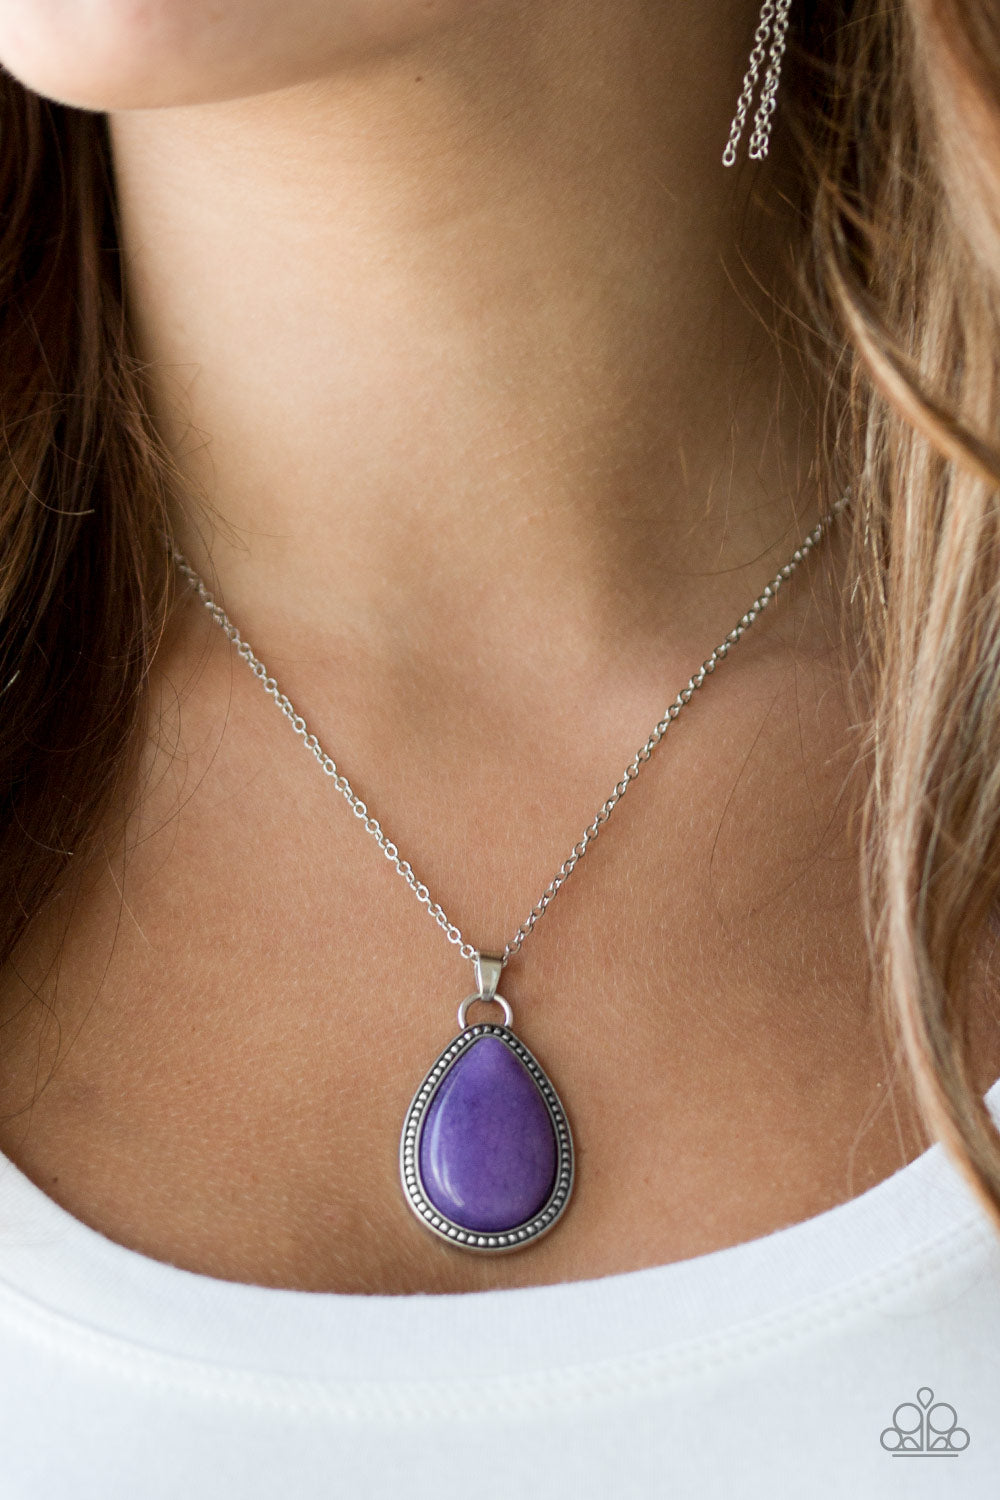 ON THE HOME FRONTIER - PURPLE AMETHYST NATURAL STONE TEARDROP PENDANT NECKLACE